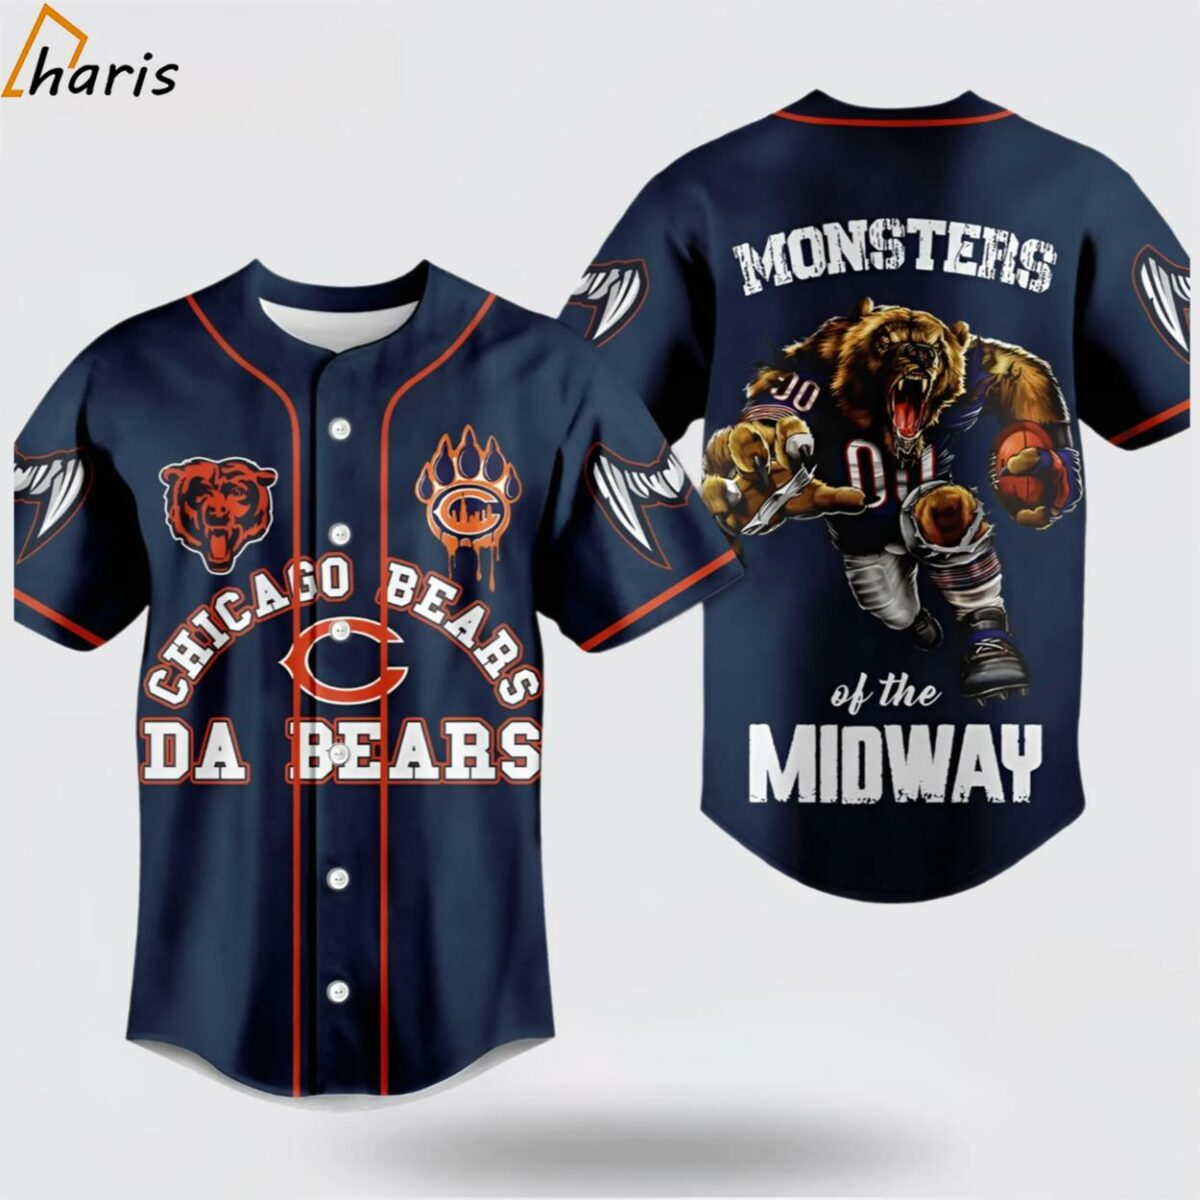 Chicago Bears Da Bears Monsters Of The Midway Baseball Jersey 1 jersey